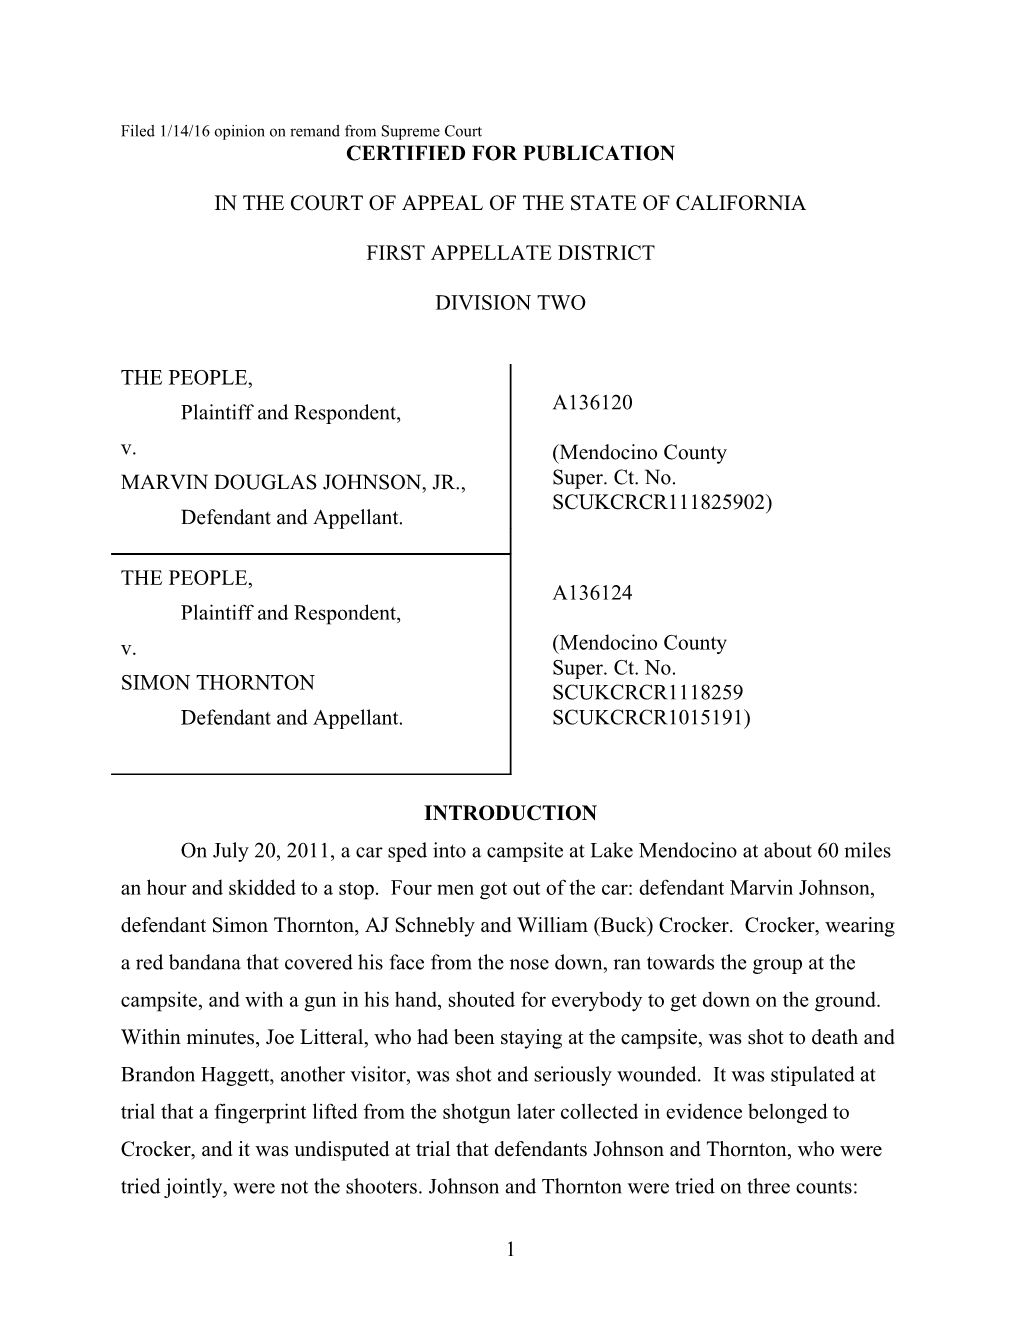 Filed 1/14/16 Opinion on Remand from Supreme Court